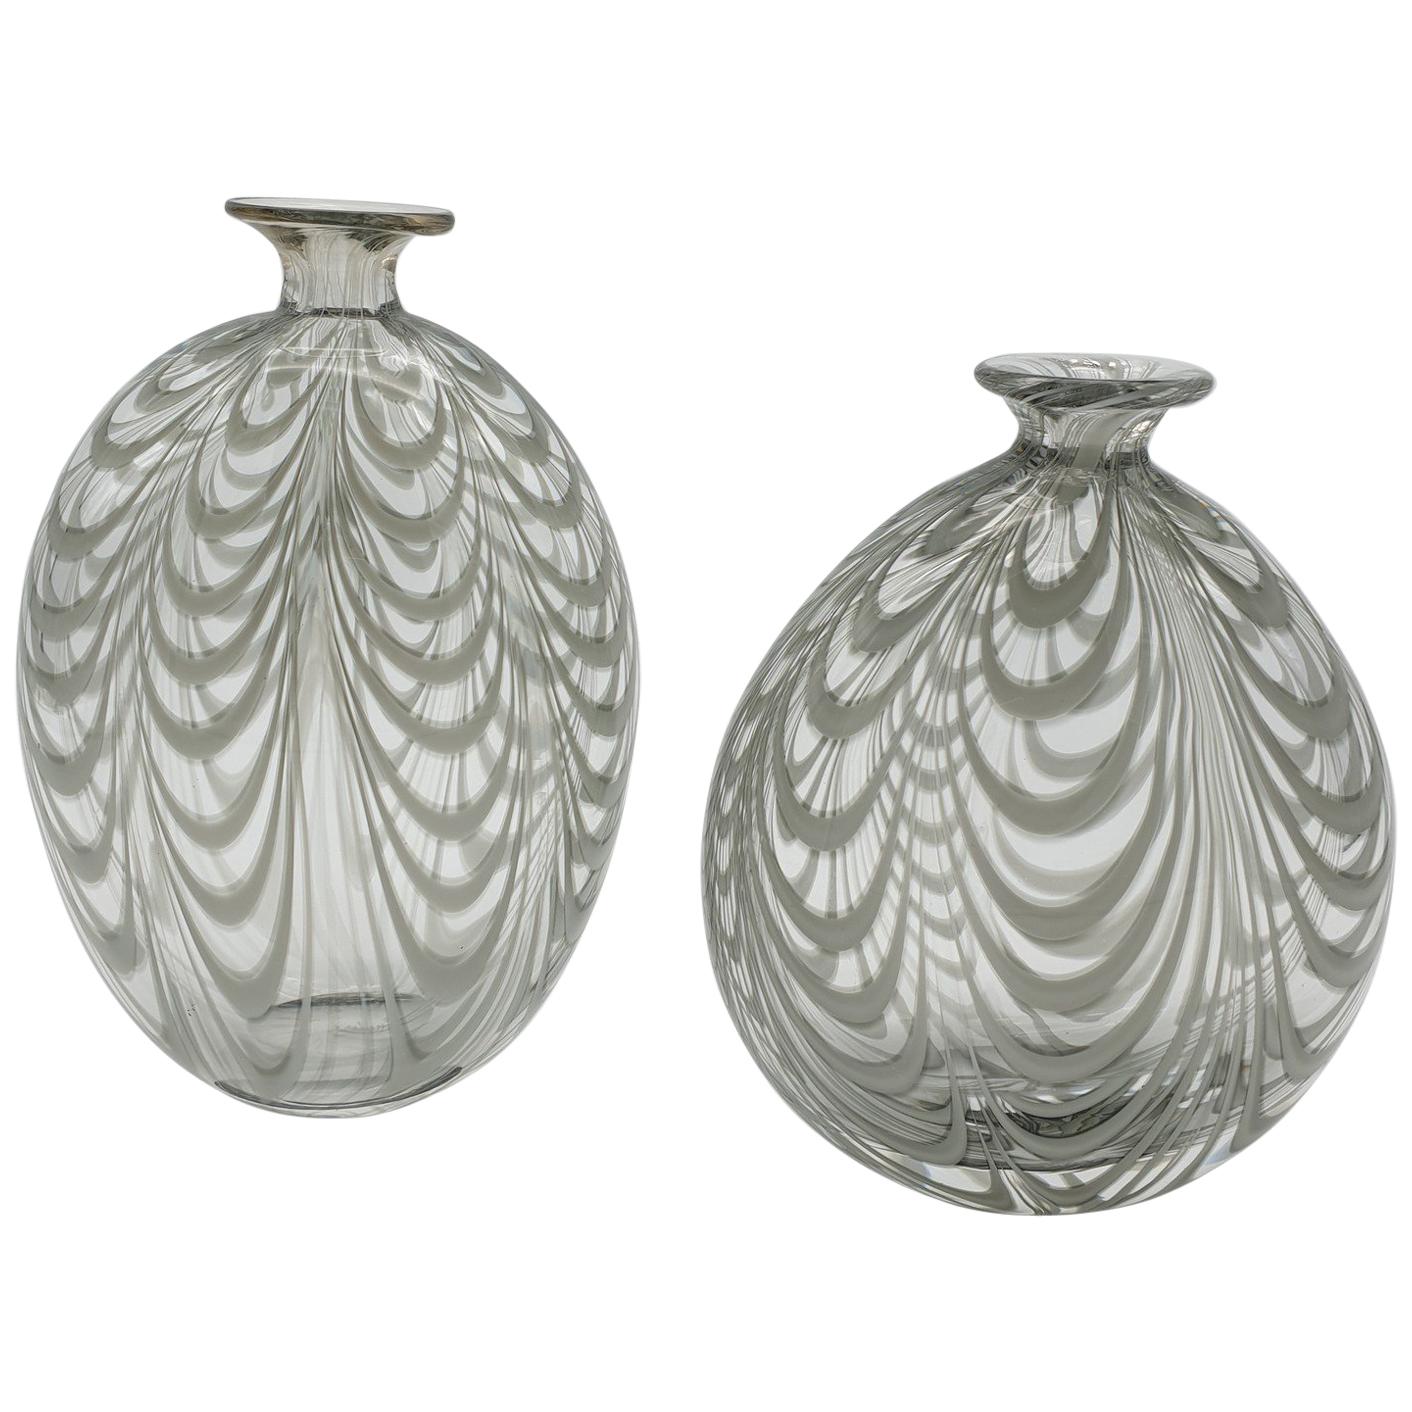 Pair of Murano Glass Vases in "Fenicio" Festooning Pattern by Cenedese, 1970s For Sale